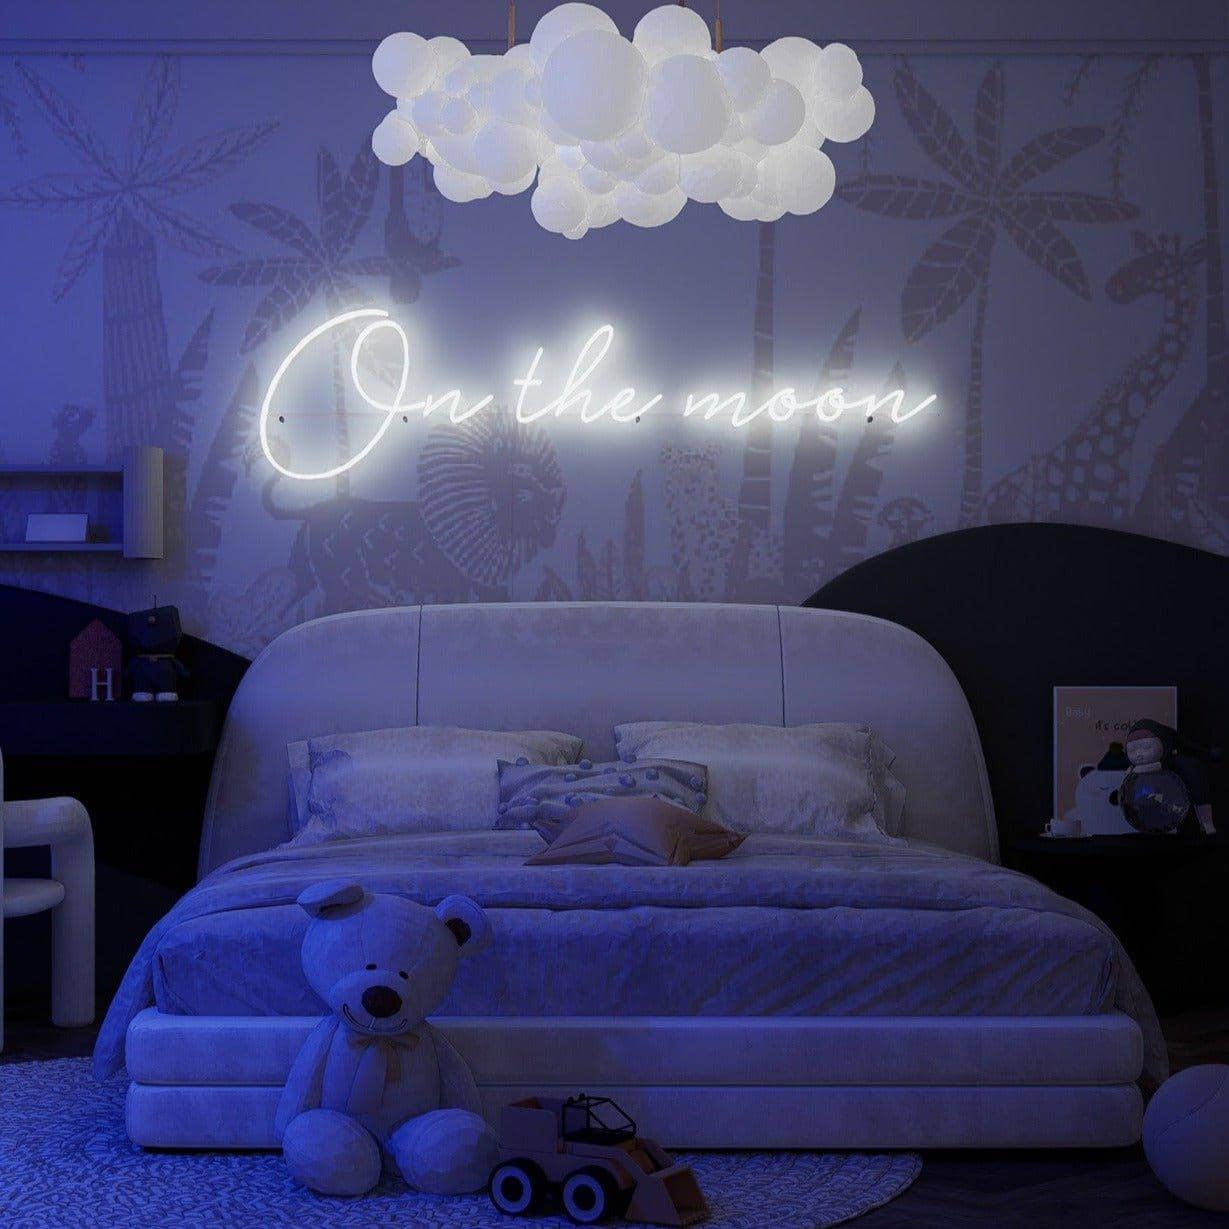 night-shot-of-lit-white-neon-lights-hanging-on-display-in-bedroom-on-the-moon